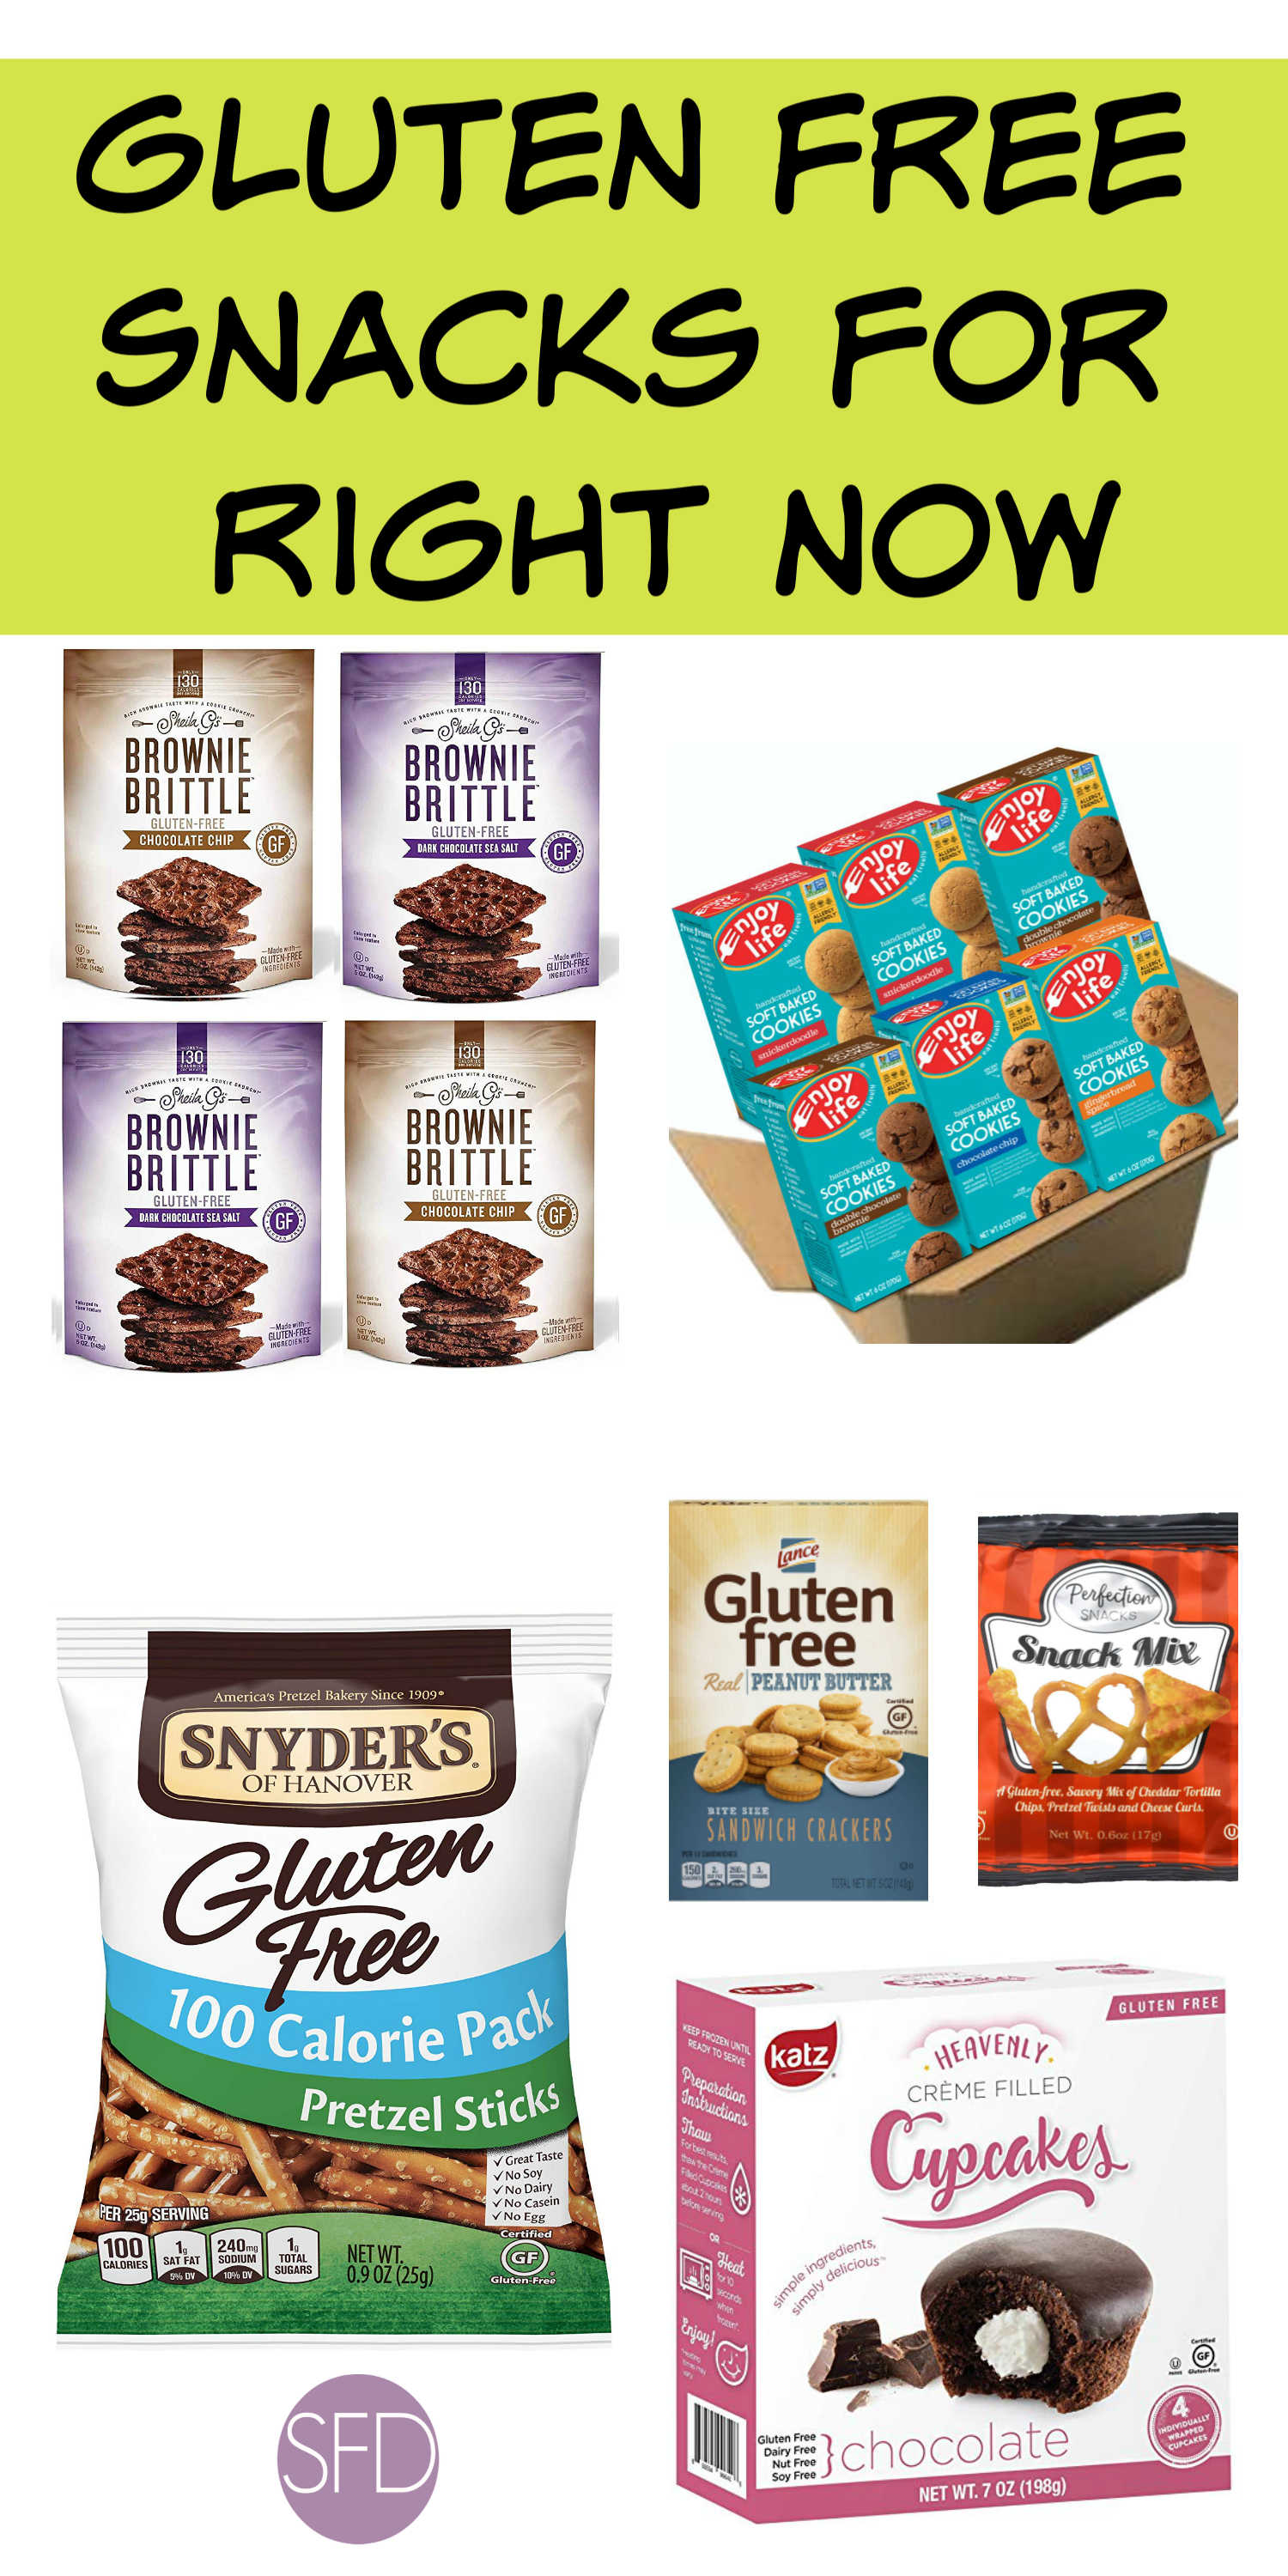 Gluten Free Snacks for Right Now